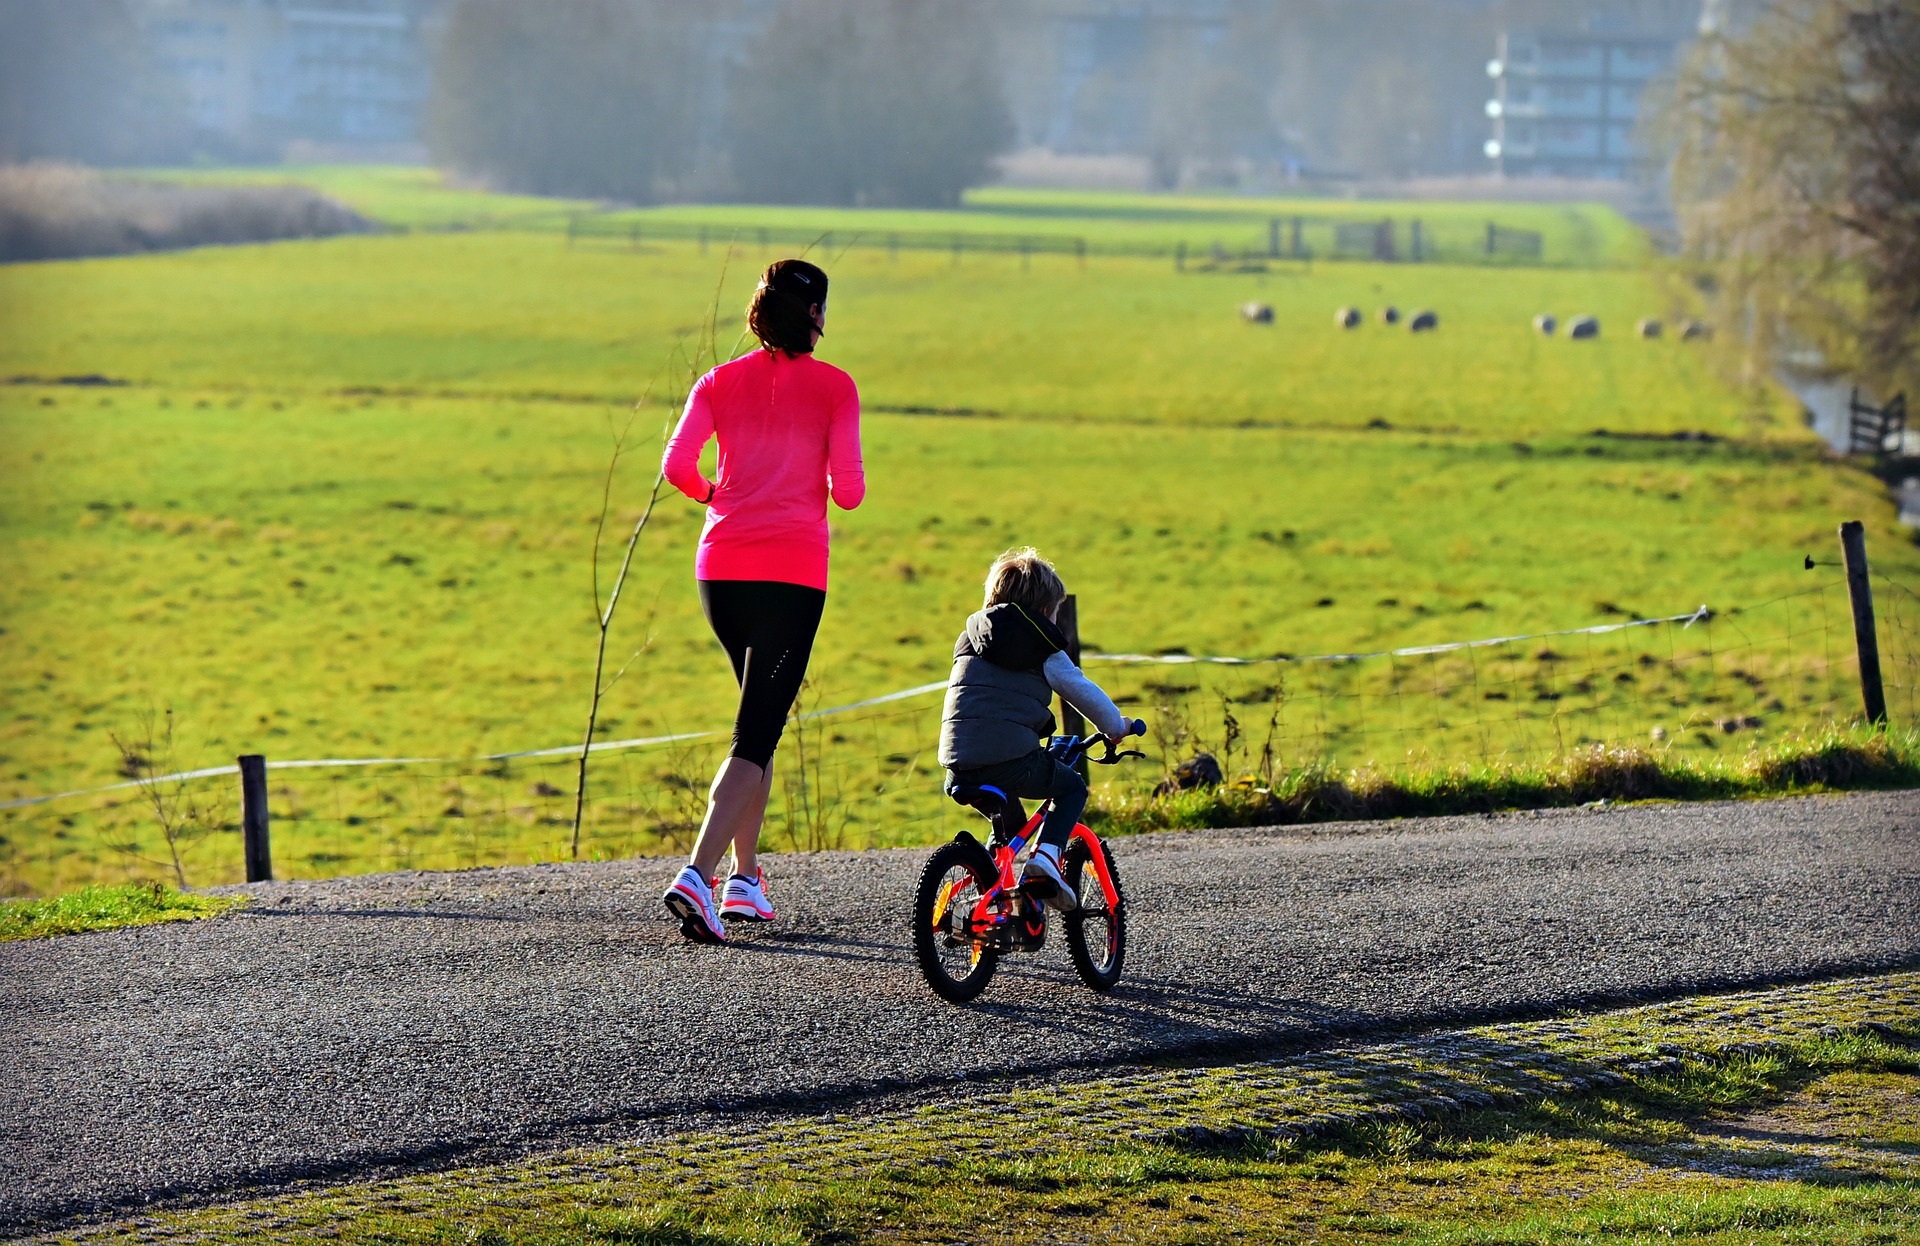 A mother jogging down a paved country trail next to a child riding an orange bicycle.